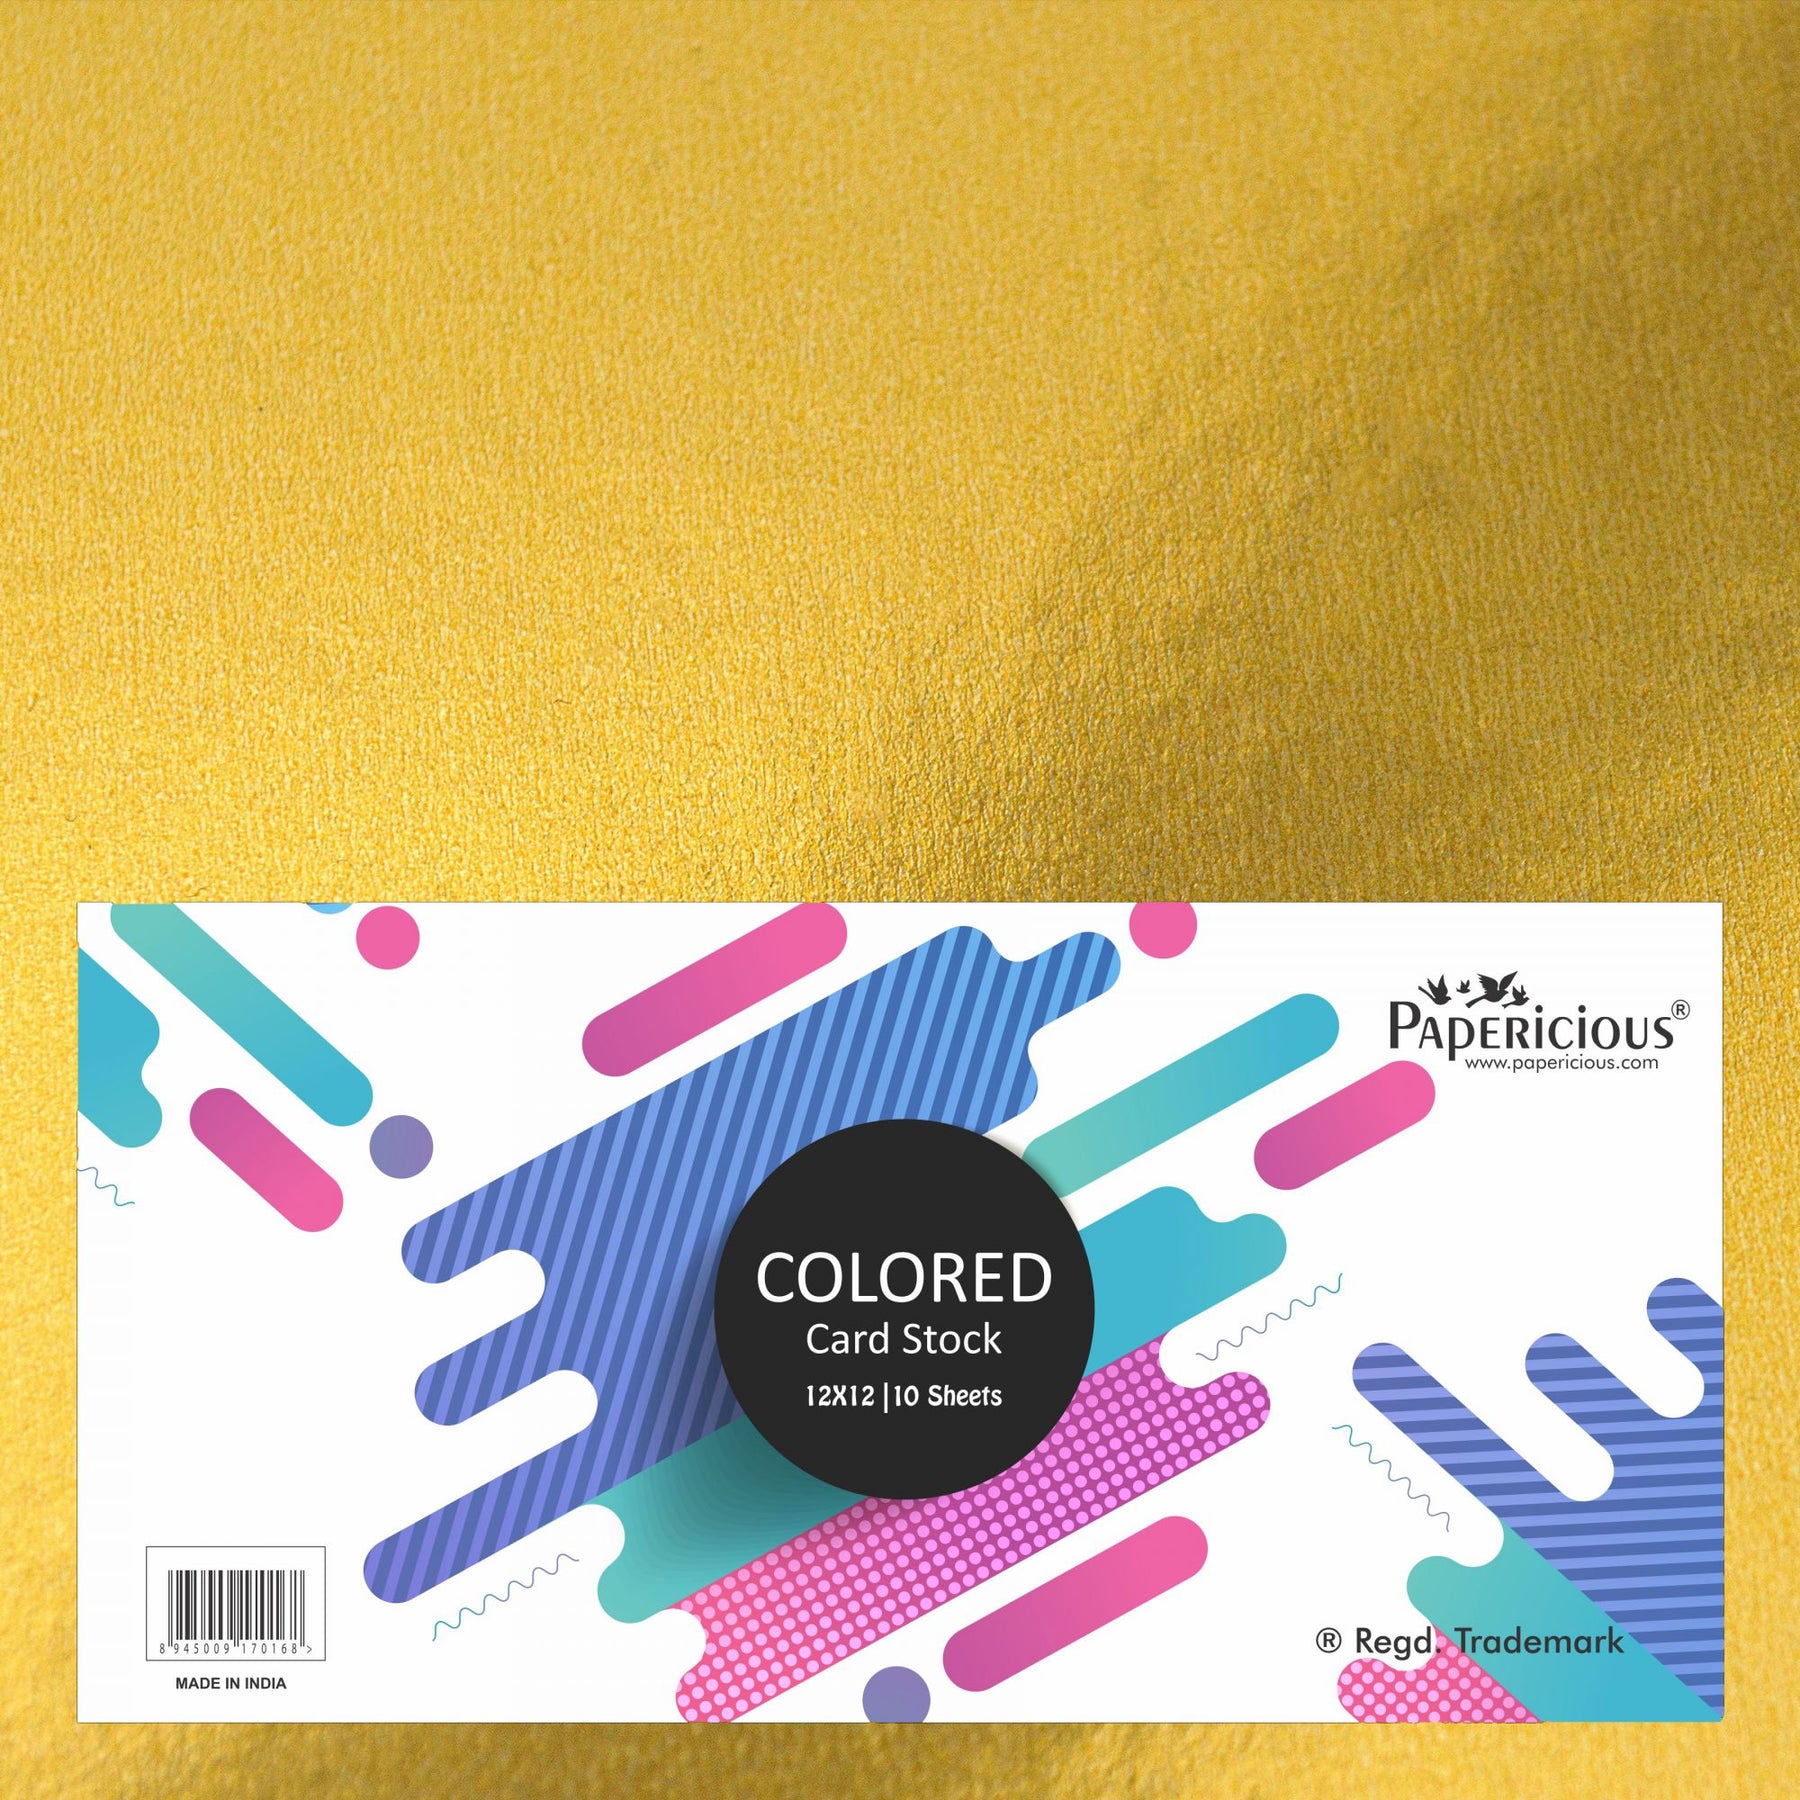 PAPERICIOUS - Golden Mirror - 240GSM Colored Cardstock 12x12 inch / 10 Sheets